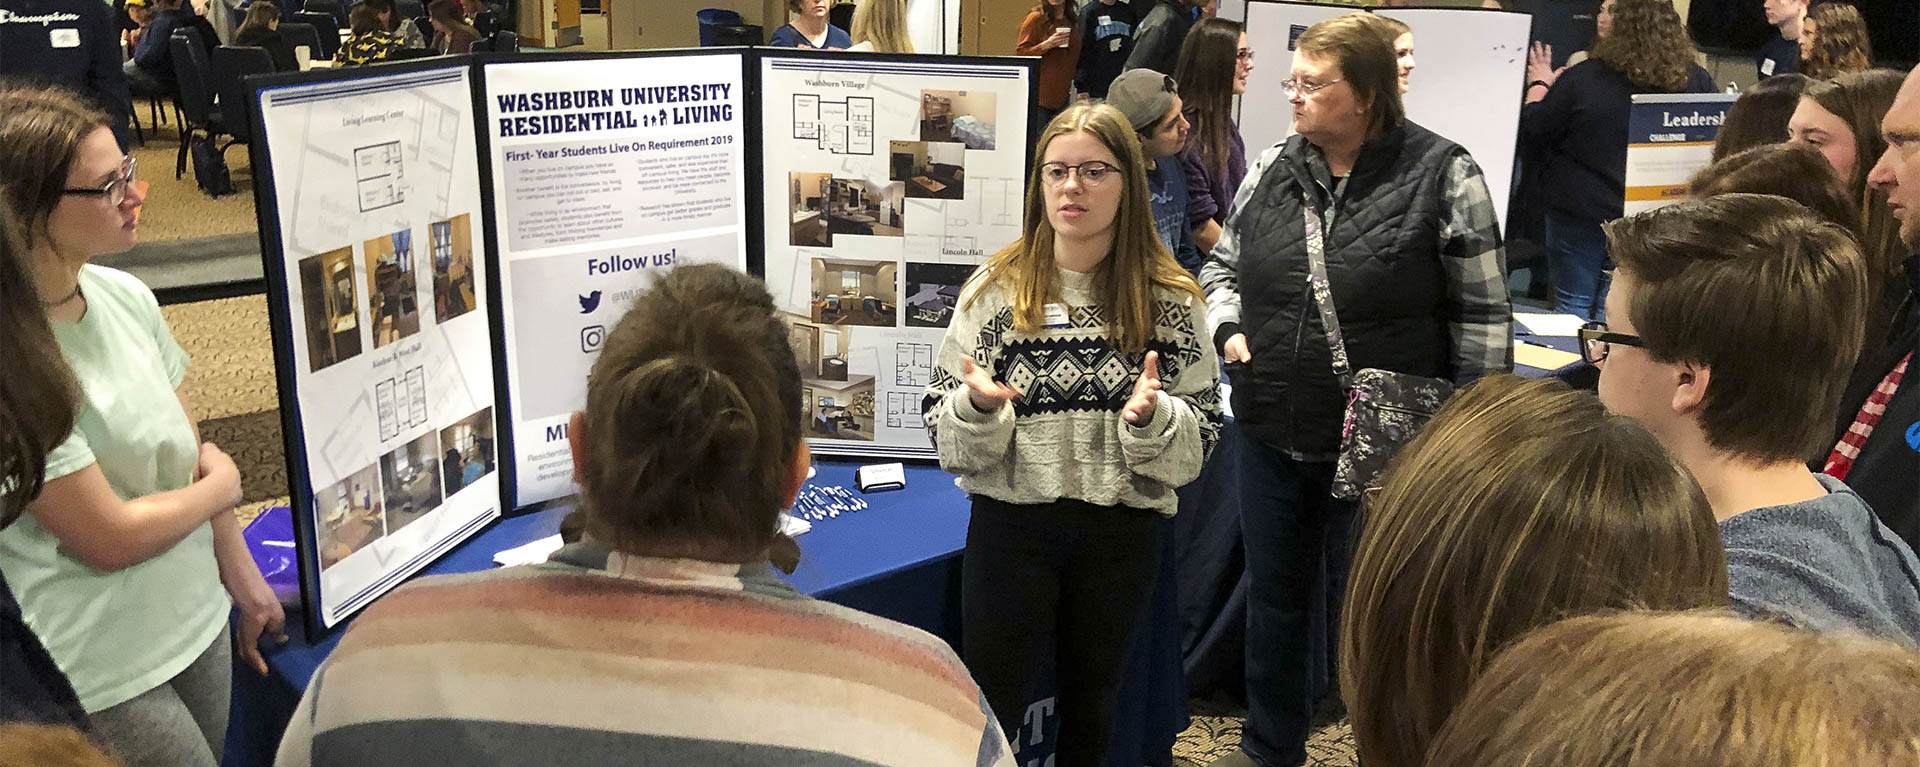 A student talks about options to live on campus during a resource fair at an Ichabod Day.